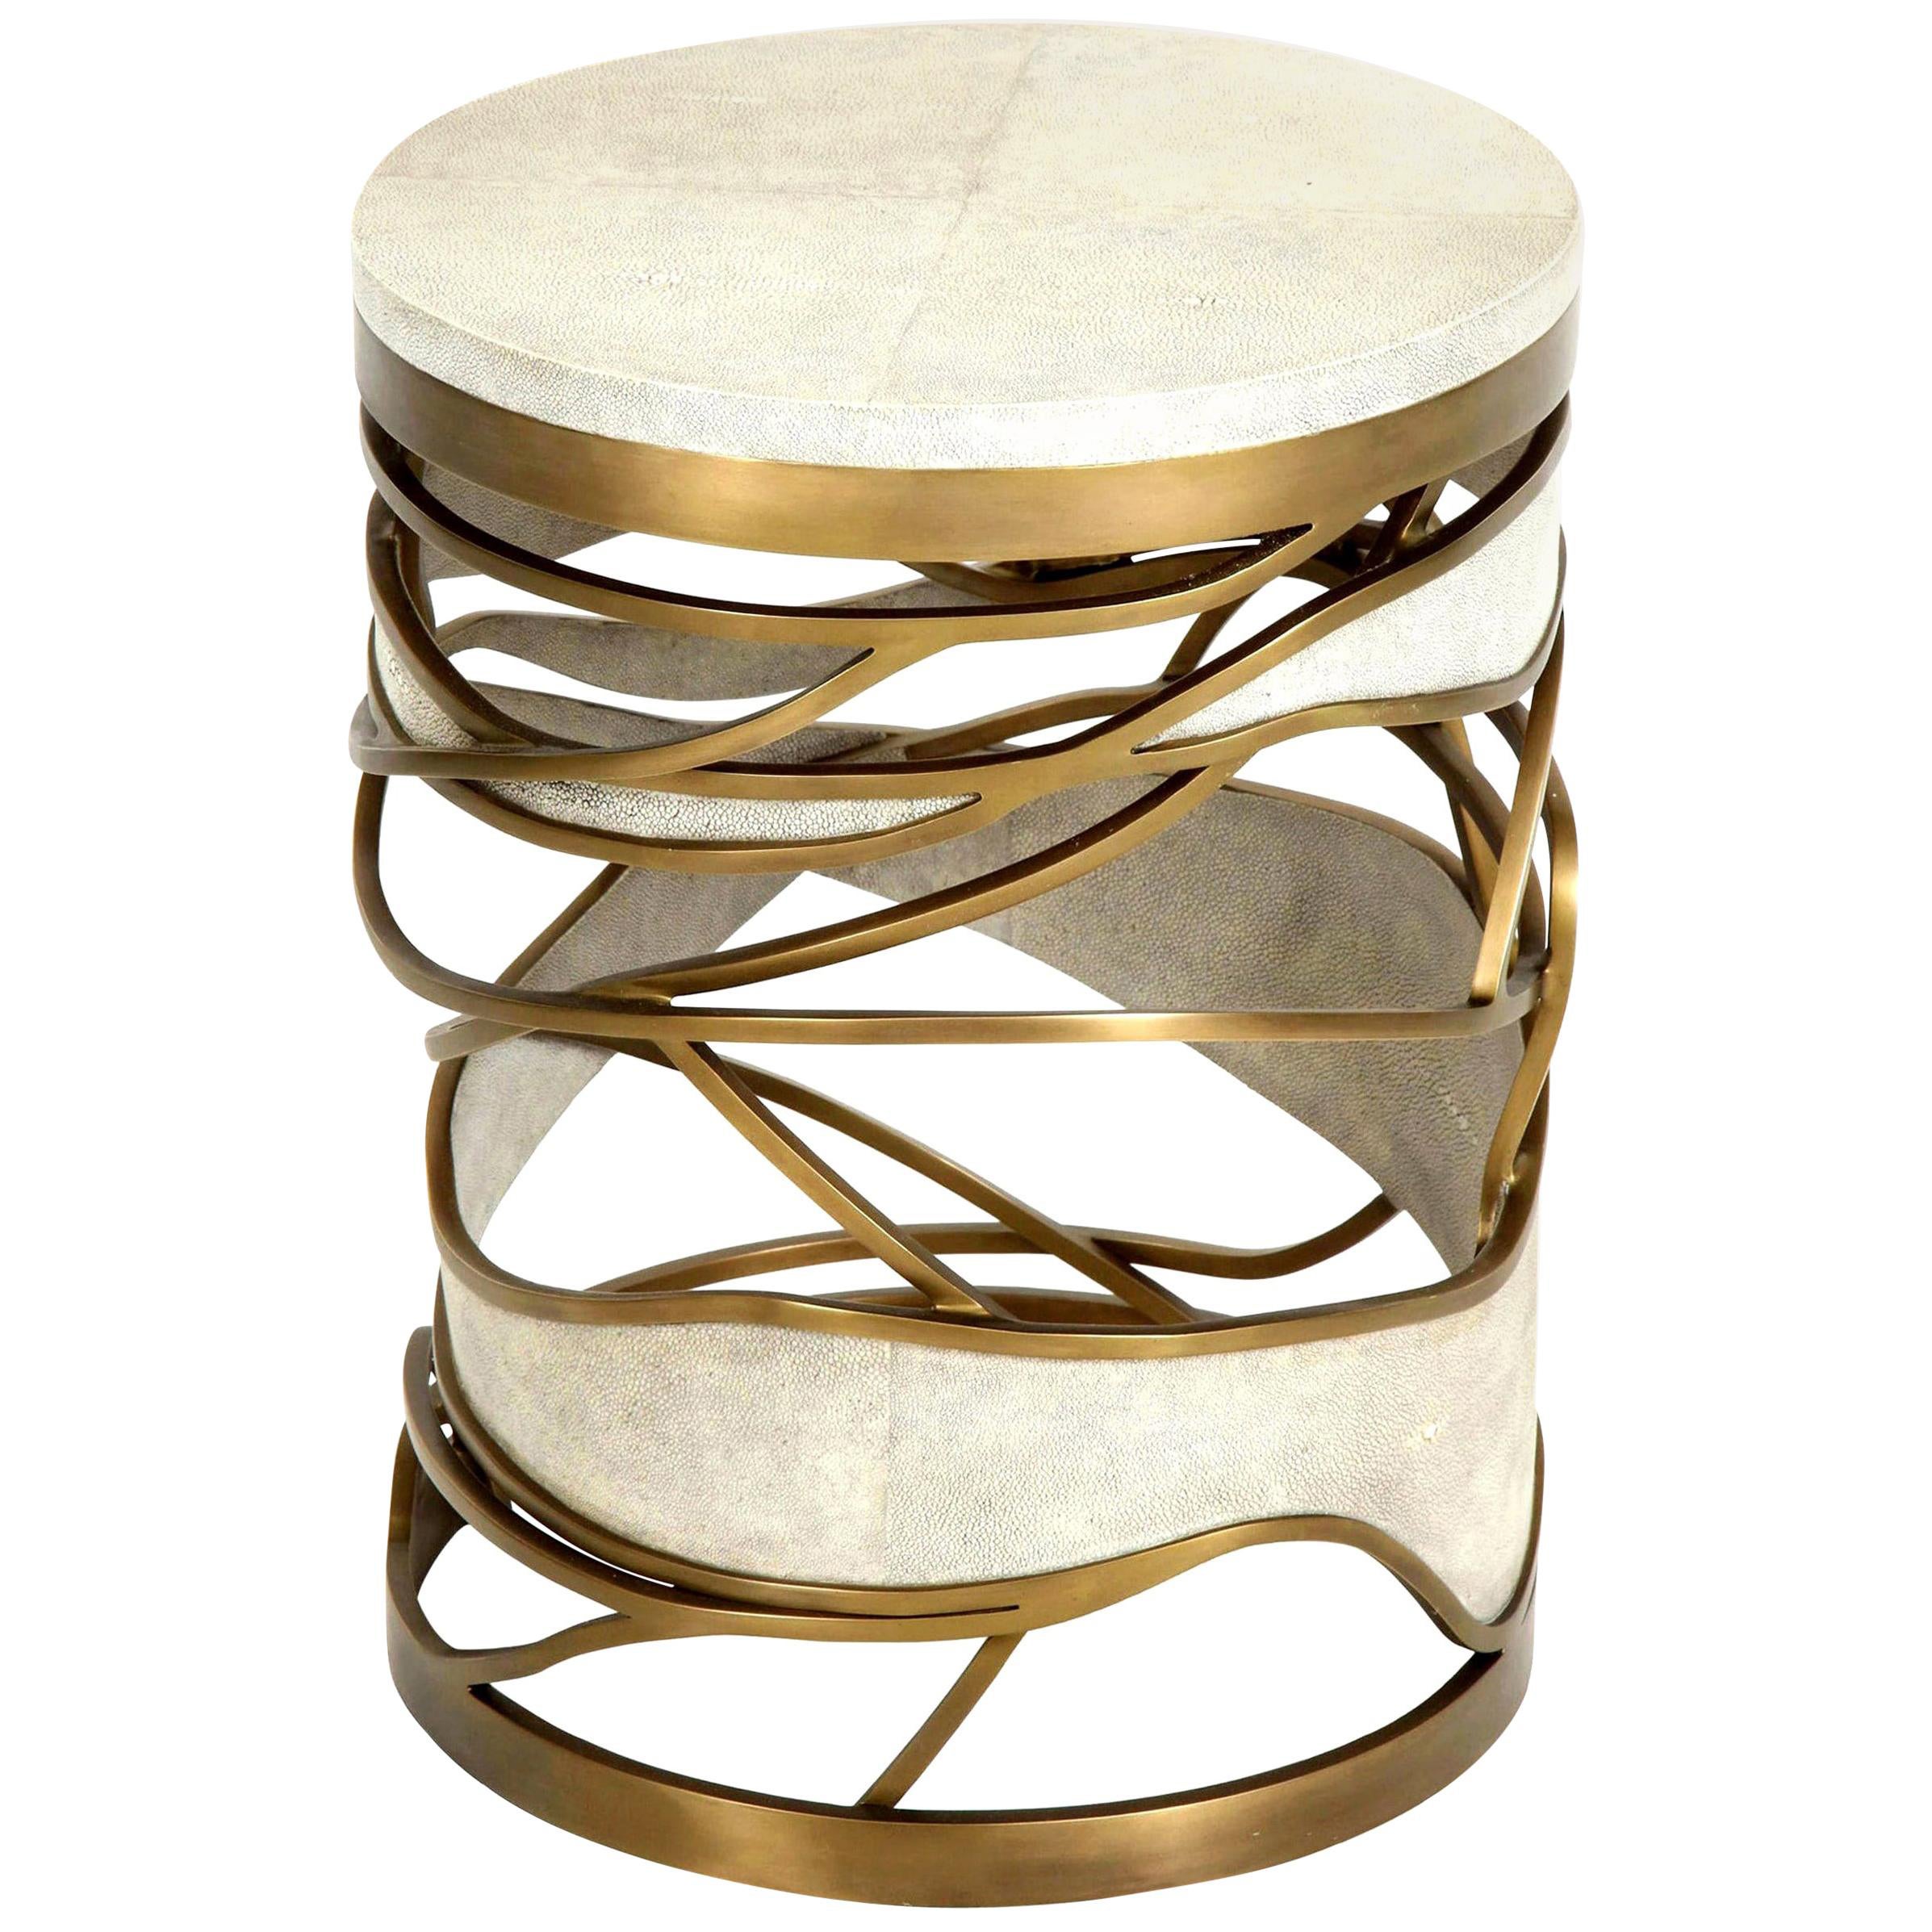 Shagreen Stool or Side Table with Brass Details, Cream Shagreen, Contemporary